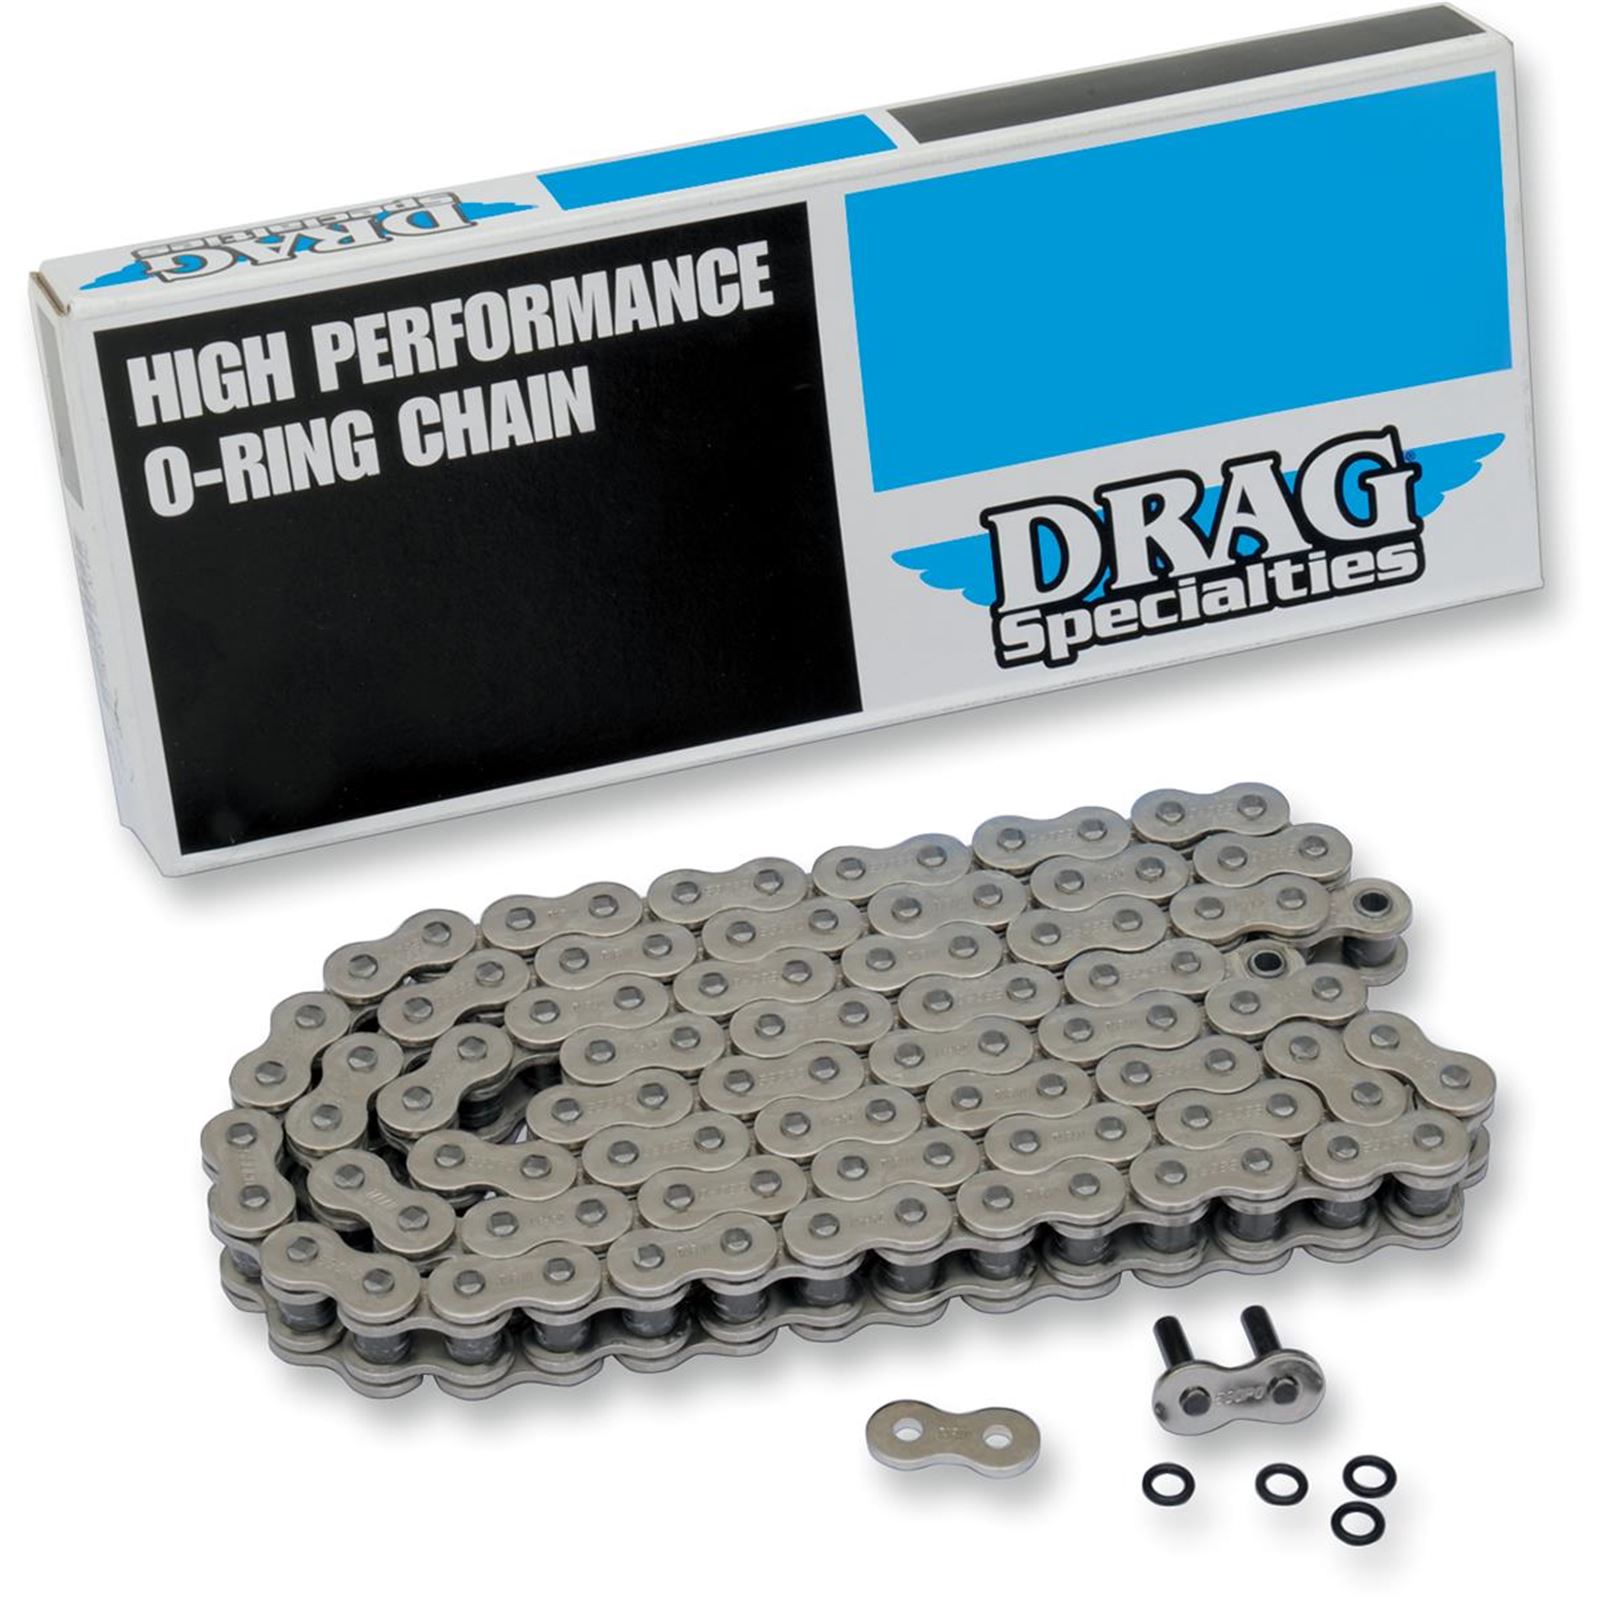 Drag Specialties 530 Series - O-Ring Chain - Chrome - 102 Links